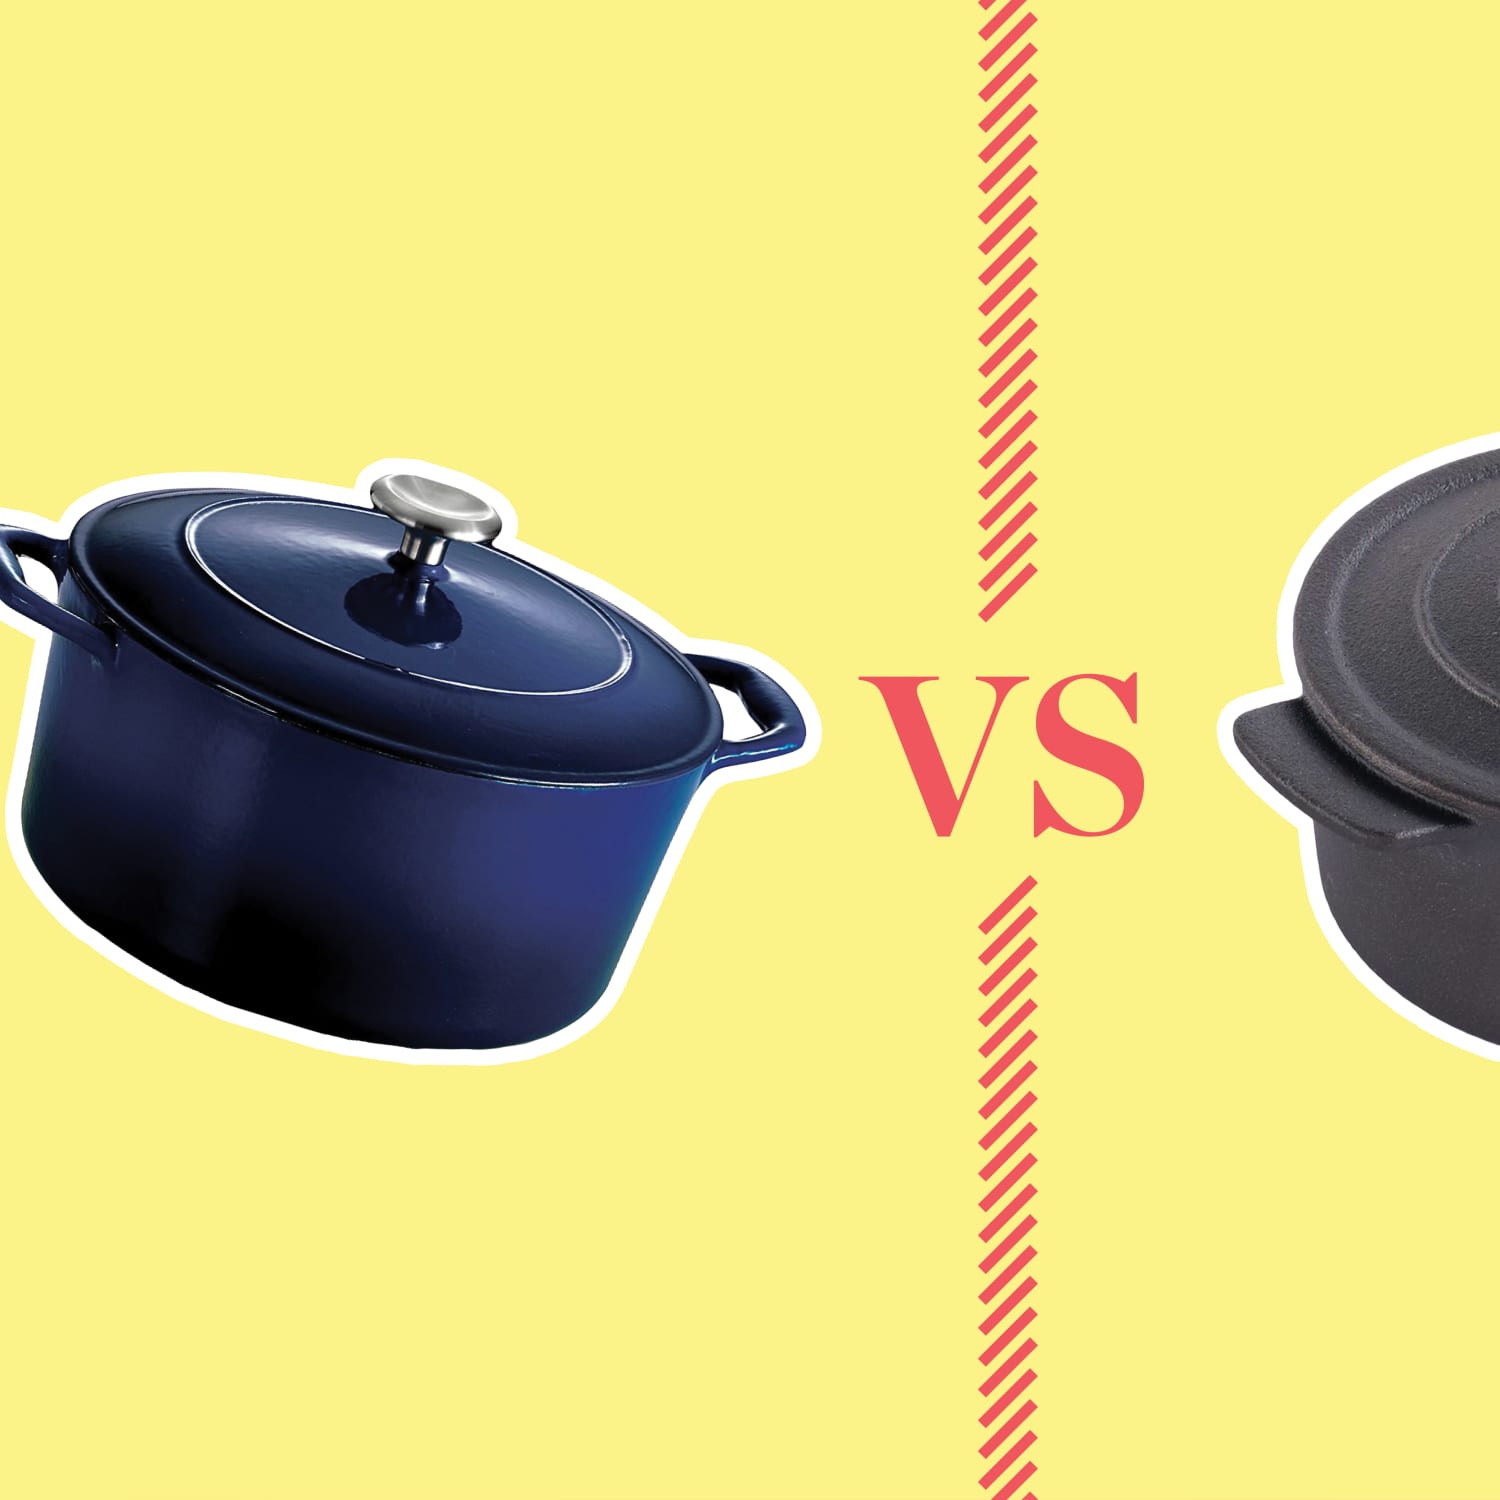 Cast Iron vs. Enameled Cast Iron (10 Major Differences) - Prudent Reviews